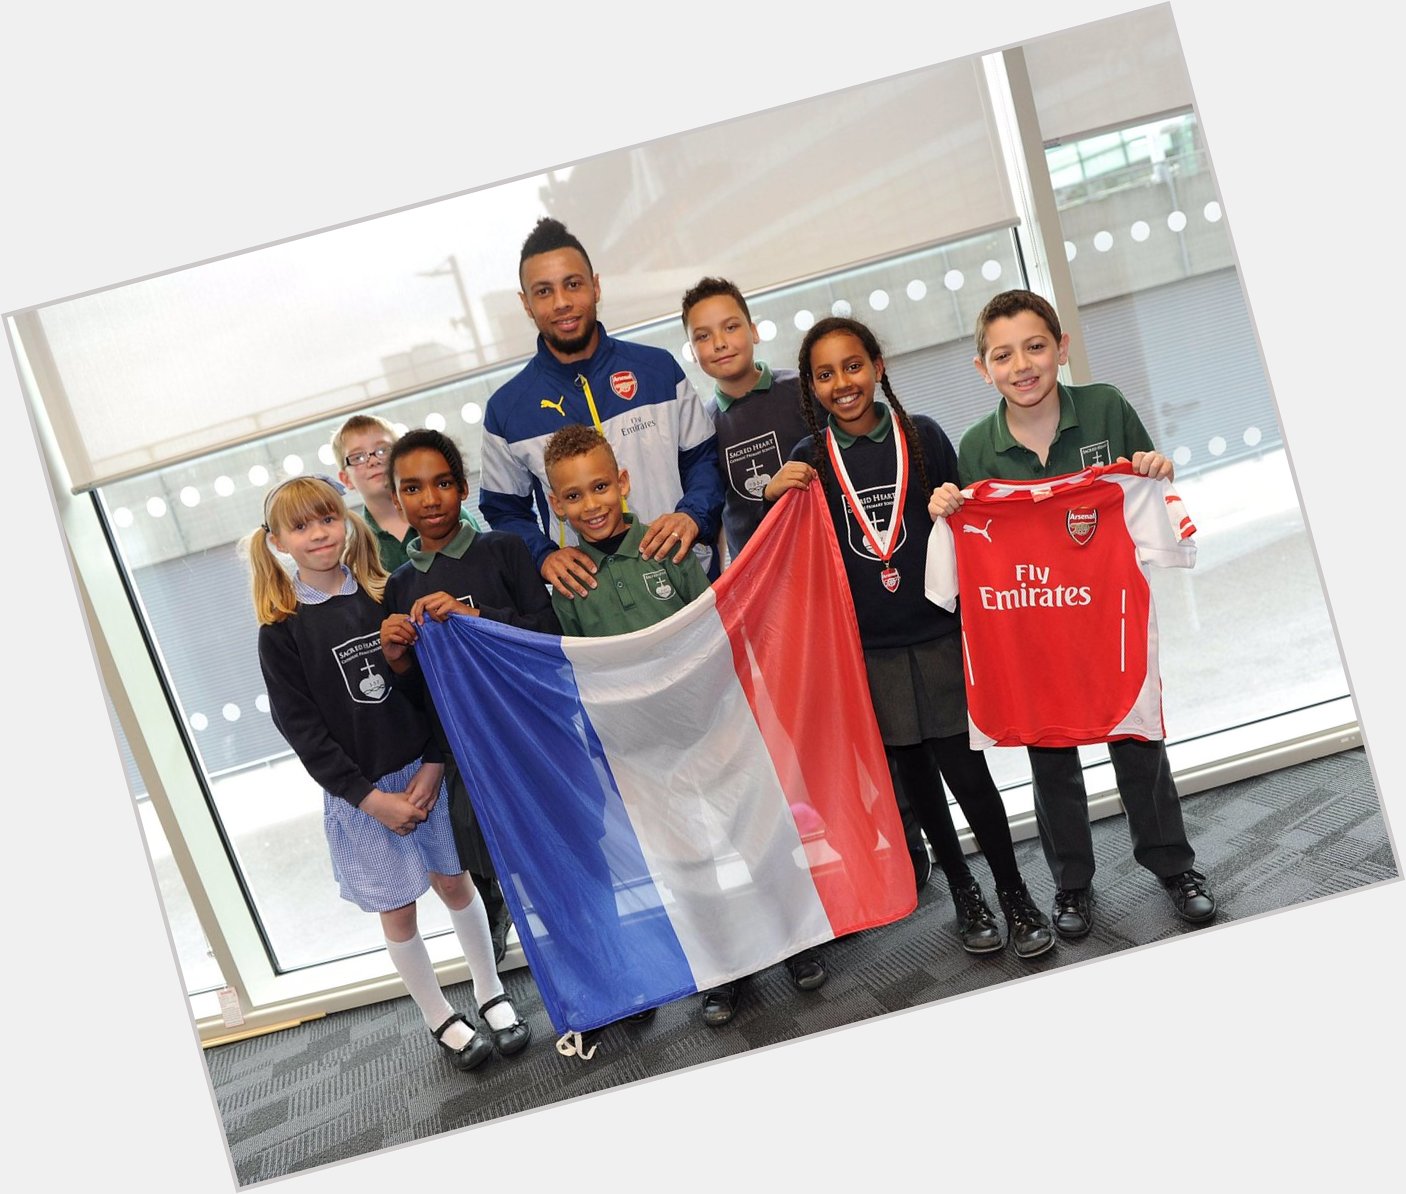  Happy birthday Francis Coquelin!

Time has flown since the opening of the Arsenal Hub 2 years ago: 